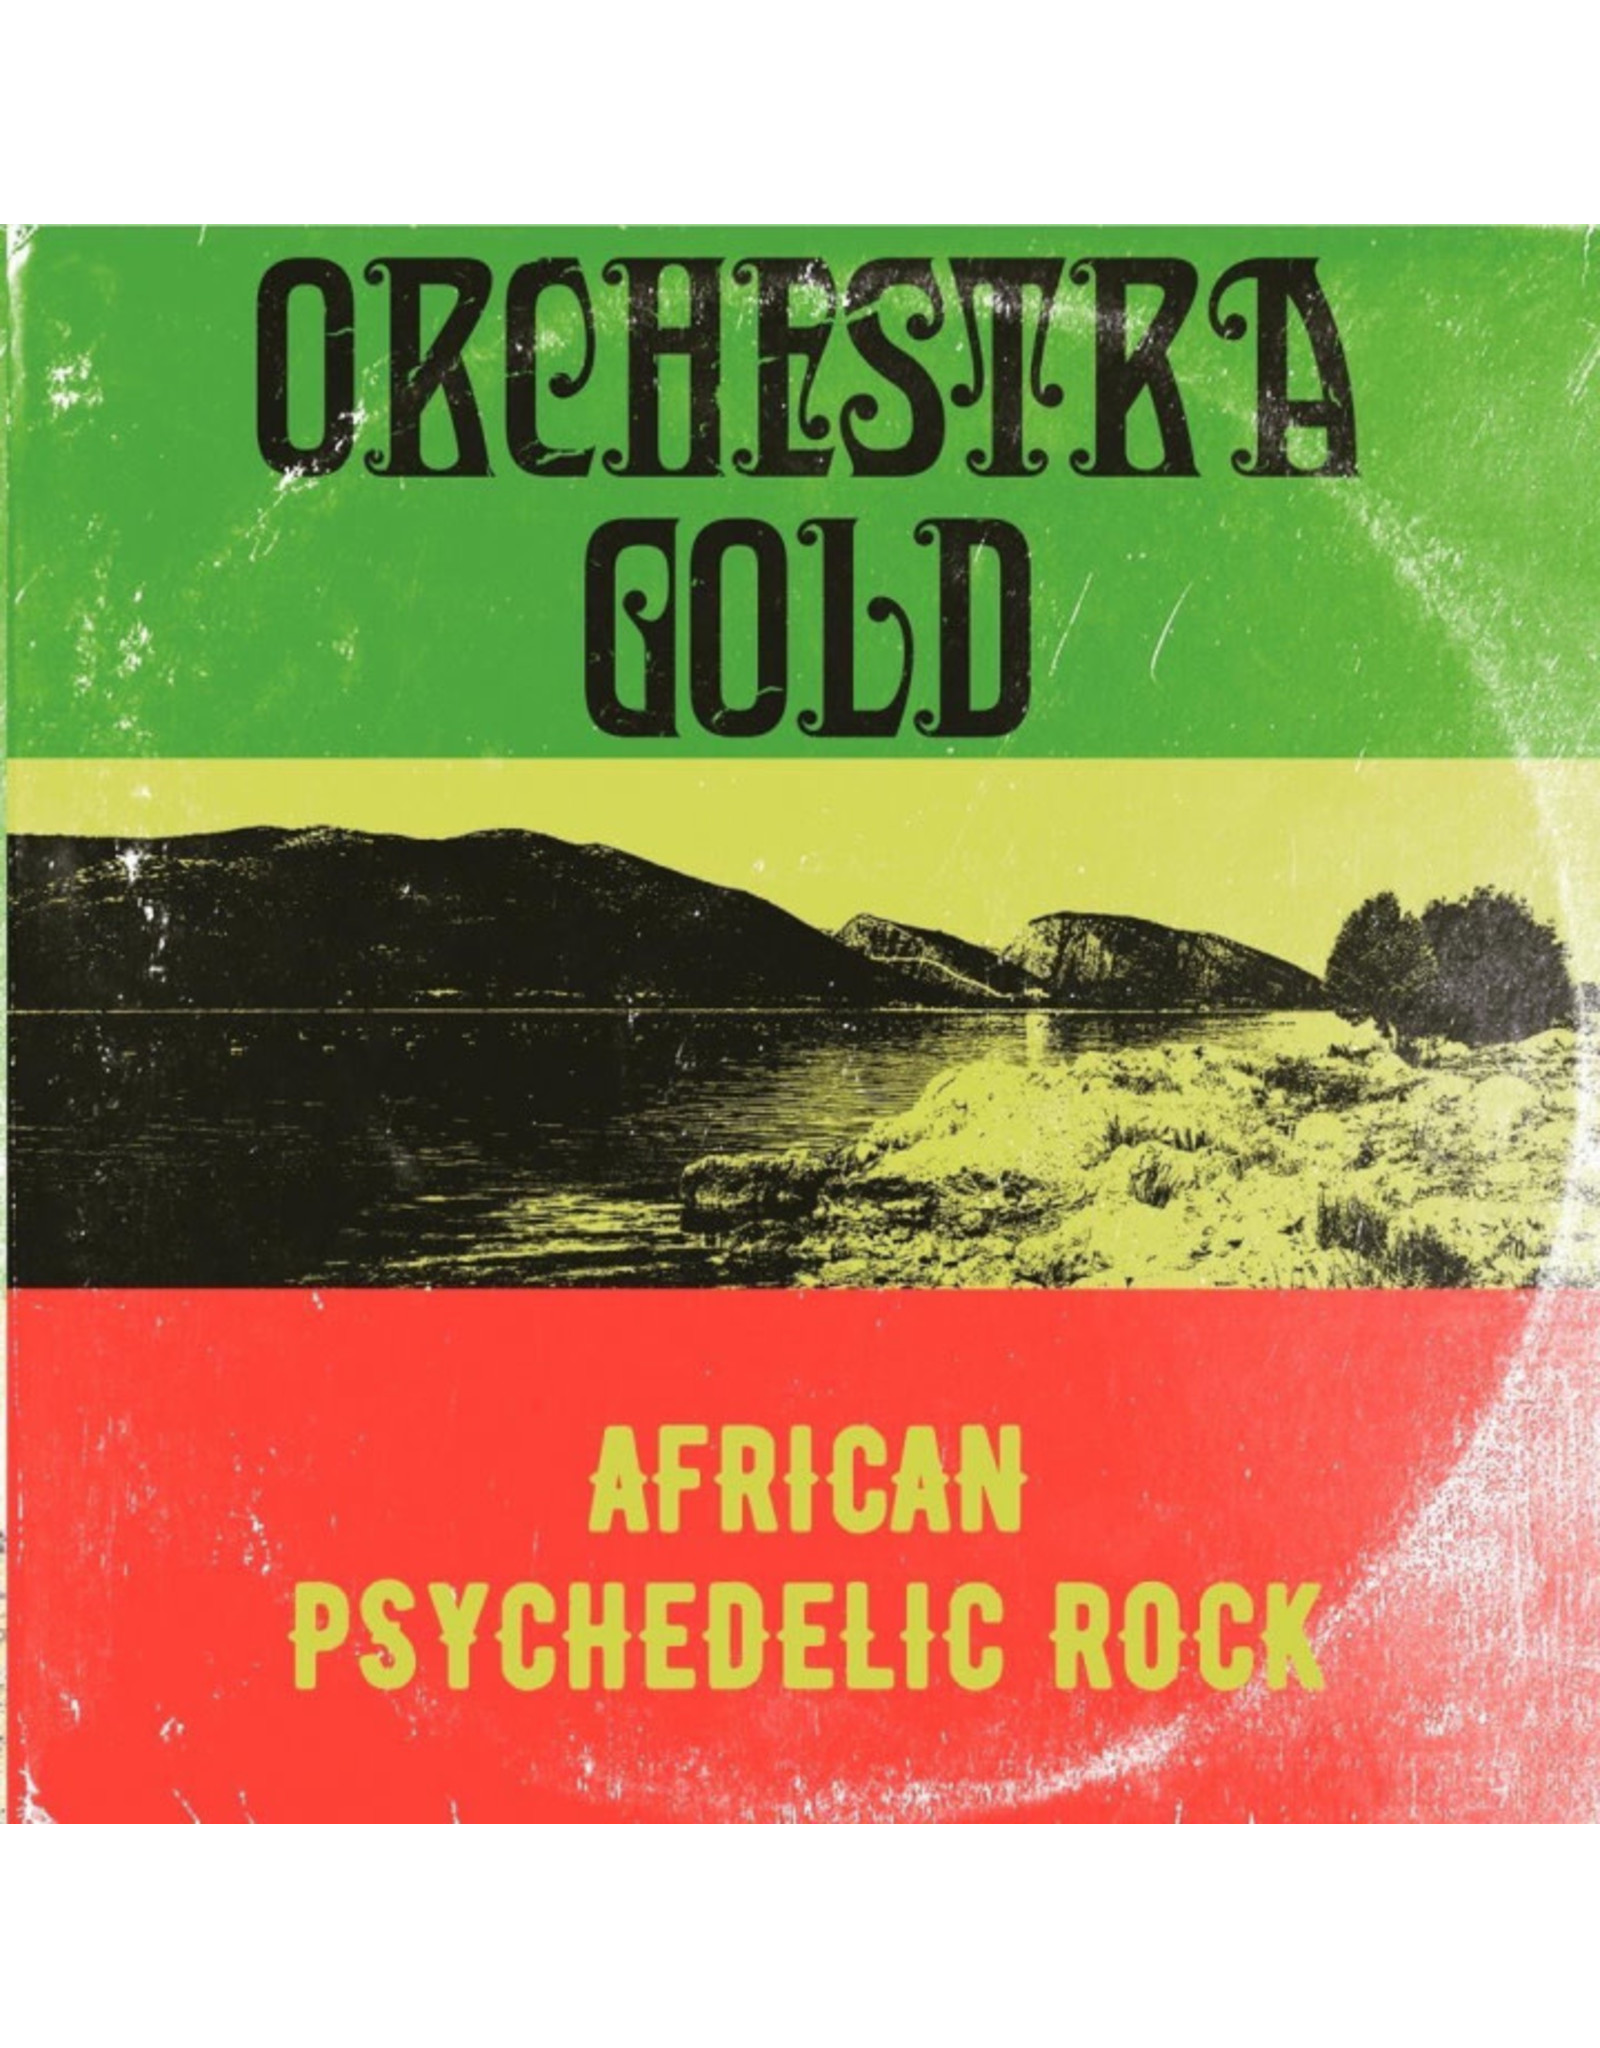 Self Release Orchestra Gold: African Psychedelic Rock LP